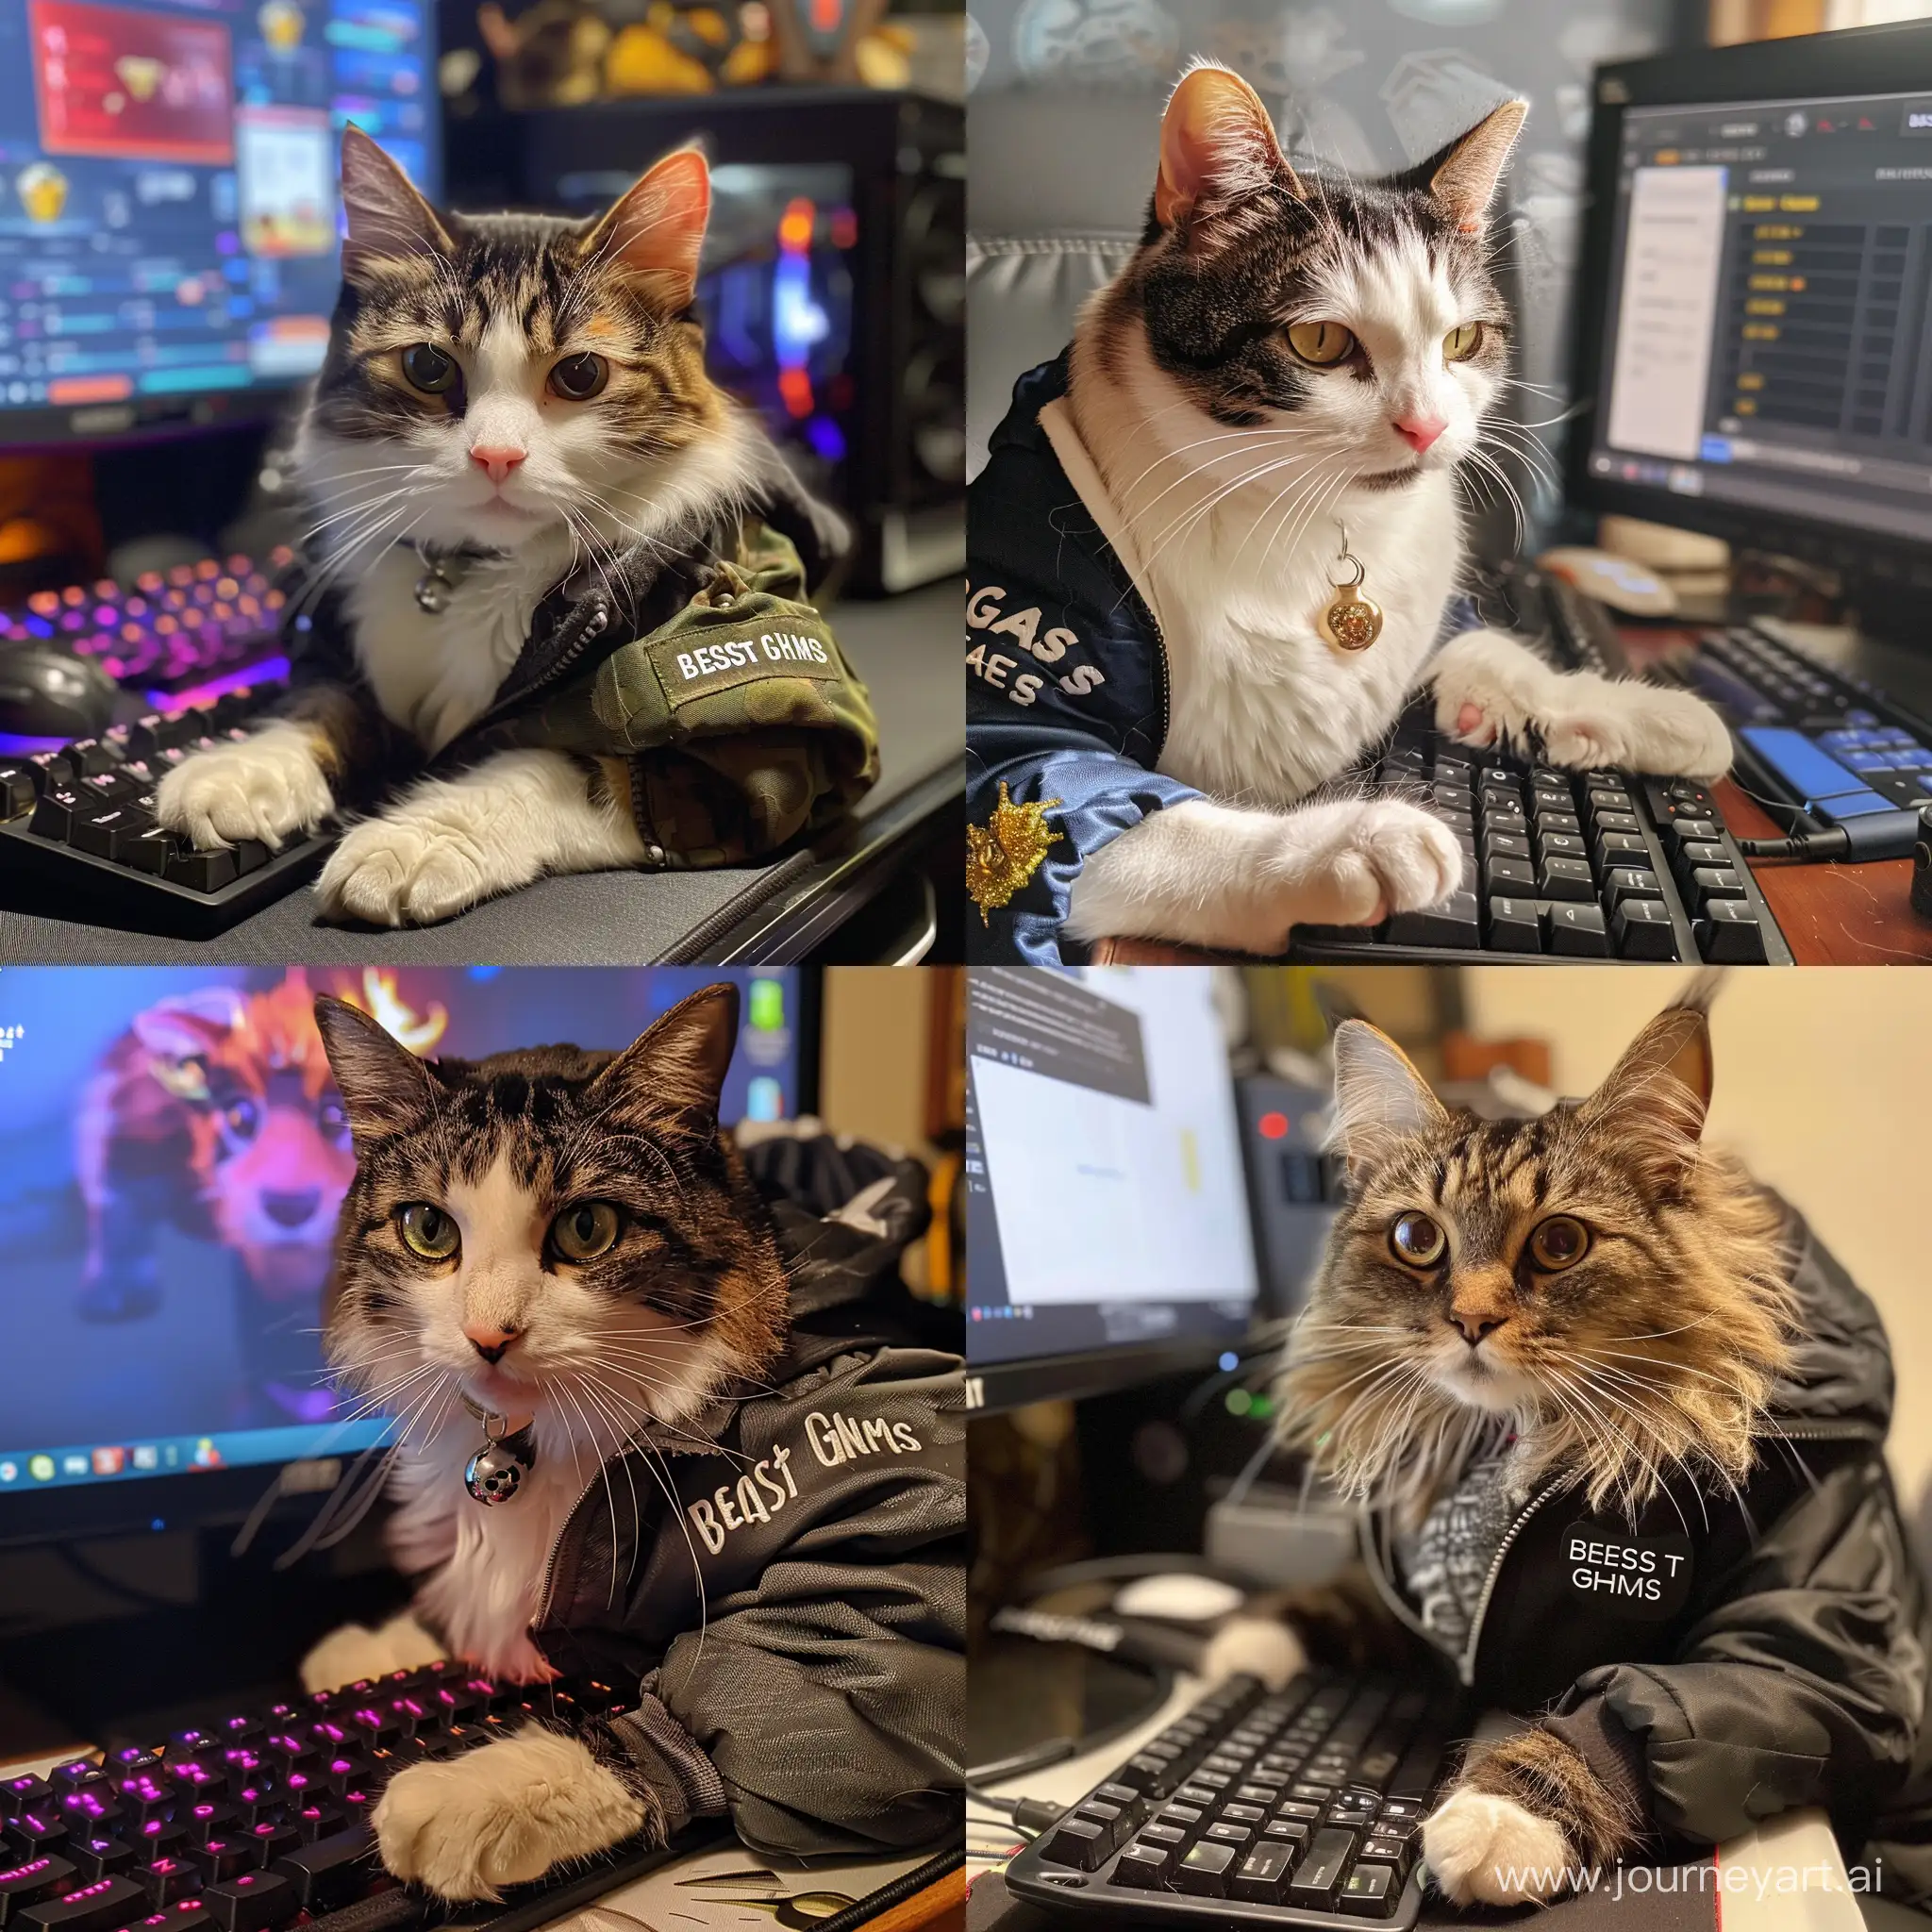 the cat is sitting at the computer and has the inscription “Beast Gems" written on his jacket